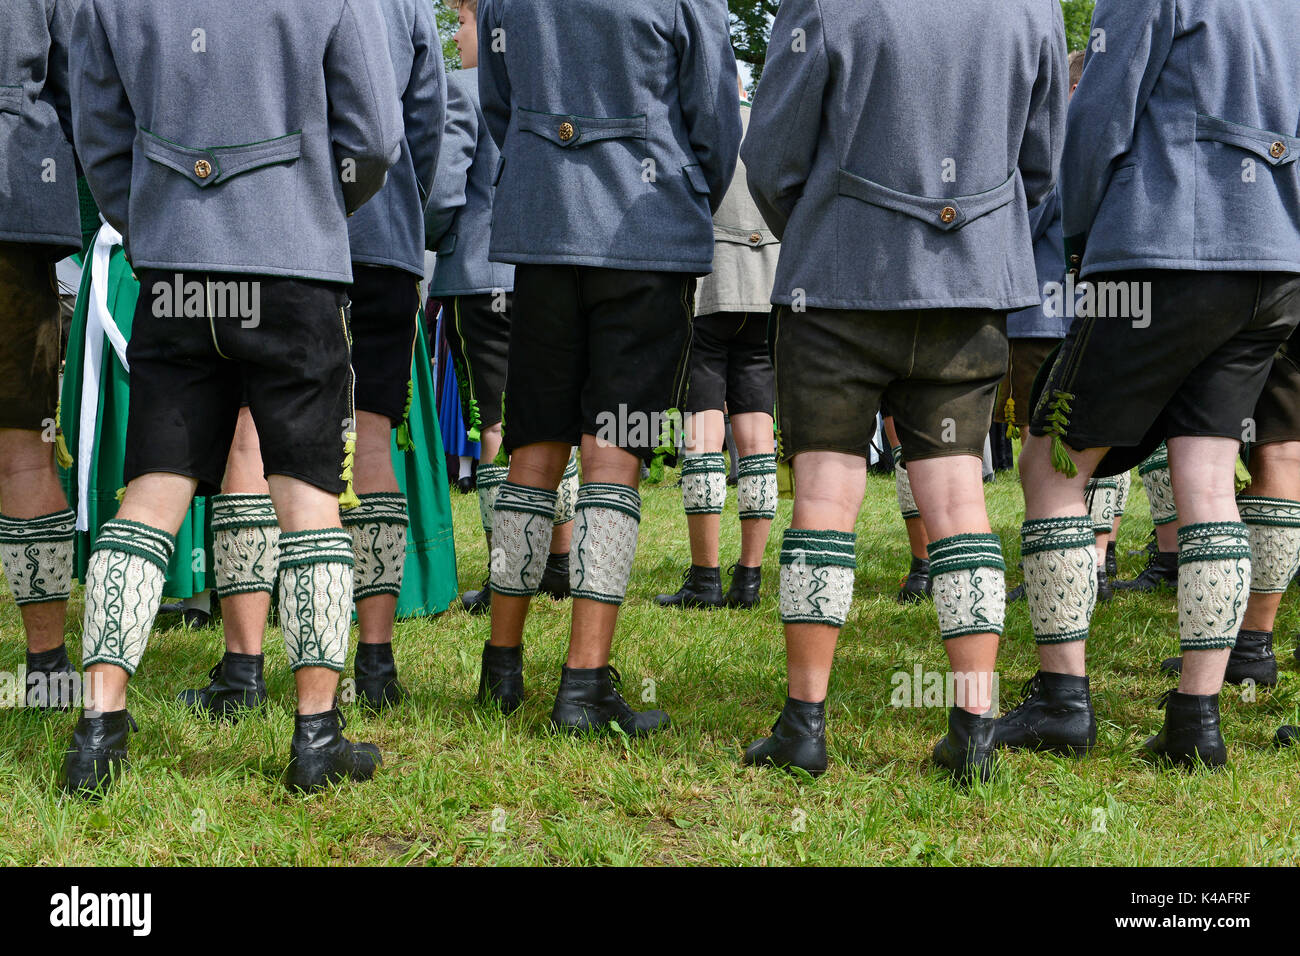 Men in leather trousers and traditional Loferl, traditional costume parade, Oberland Gaufest in Baiernrain, Upper Bavaria Stock Photo